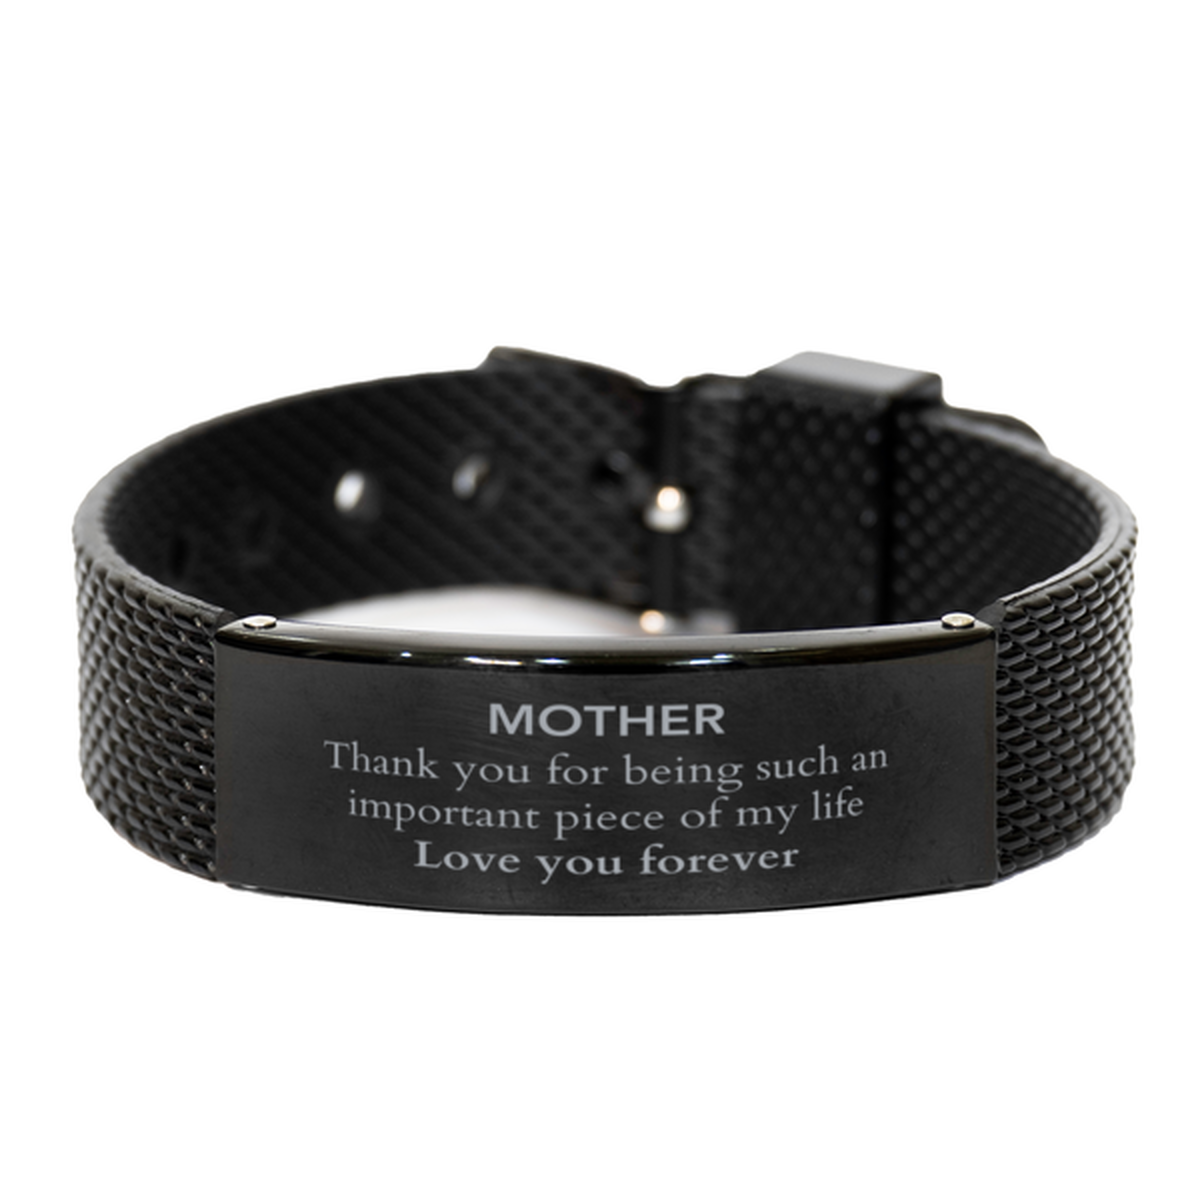 Appropriate Mother Black Shark Mesh Bracelet Epic Birthday Gifts for Mother Thank you for being such an important piece of my life Mother Christmas Mothers Fathers Day